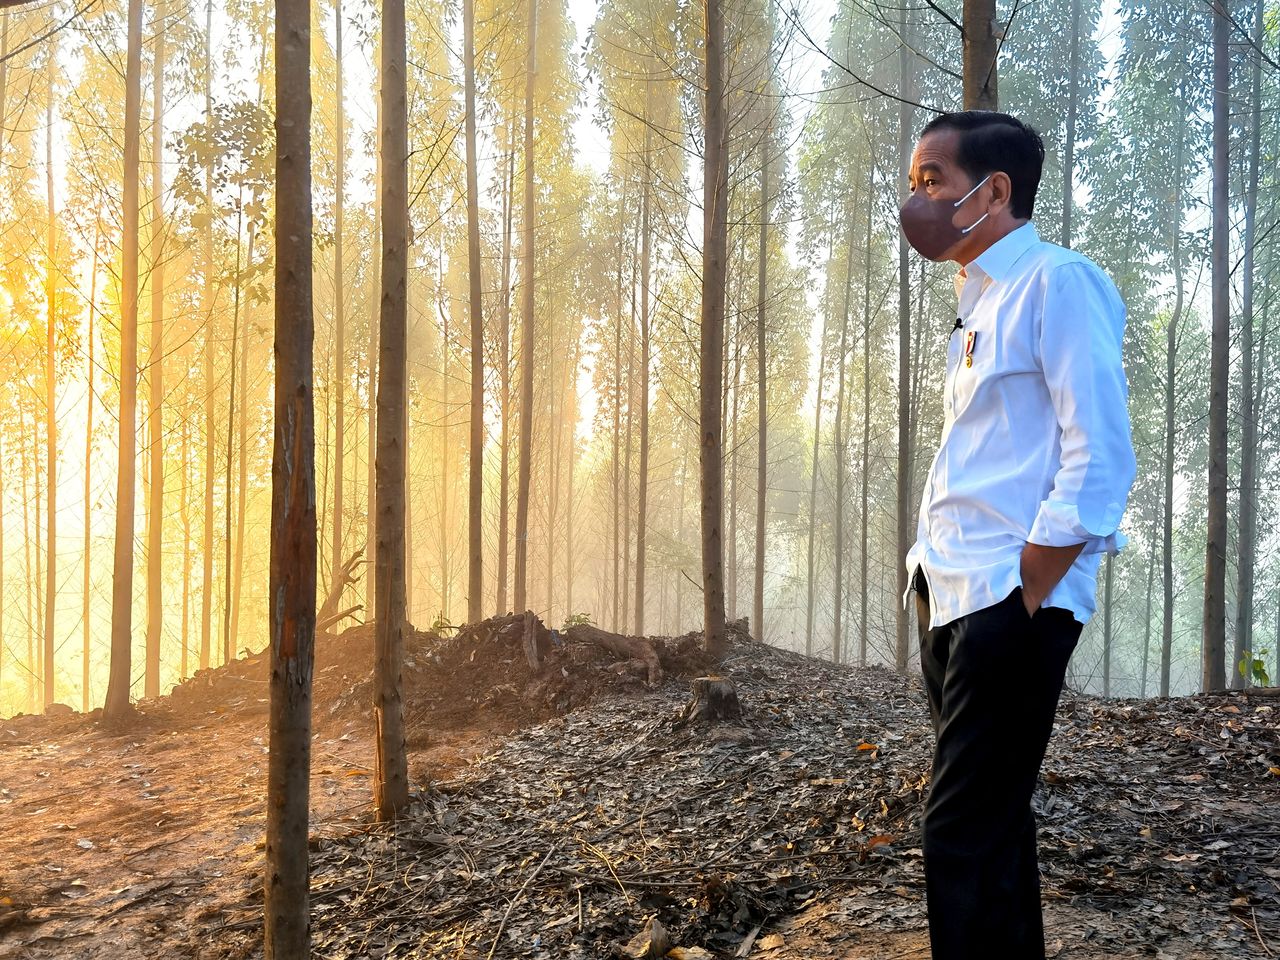 FILE PHOTO: Indonesian President Joko Widodo inspects an area that will be the site of the new capital city, during sunrise in Penajam Paser Utara regency, East Kalimantan province, Indonesia, March 15, 2022. Courtesy of Agus Suparto/Indonesian Presidential Palace/Handout via REUTERS